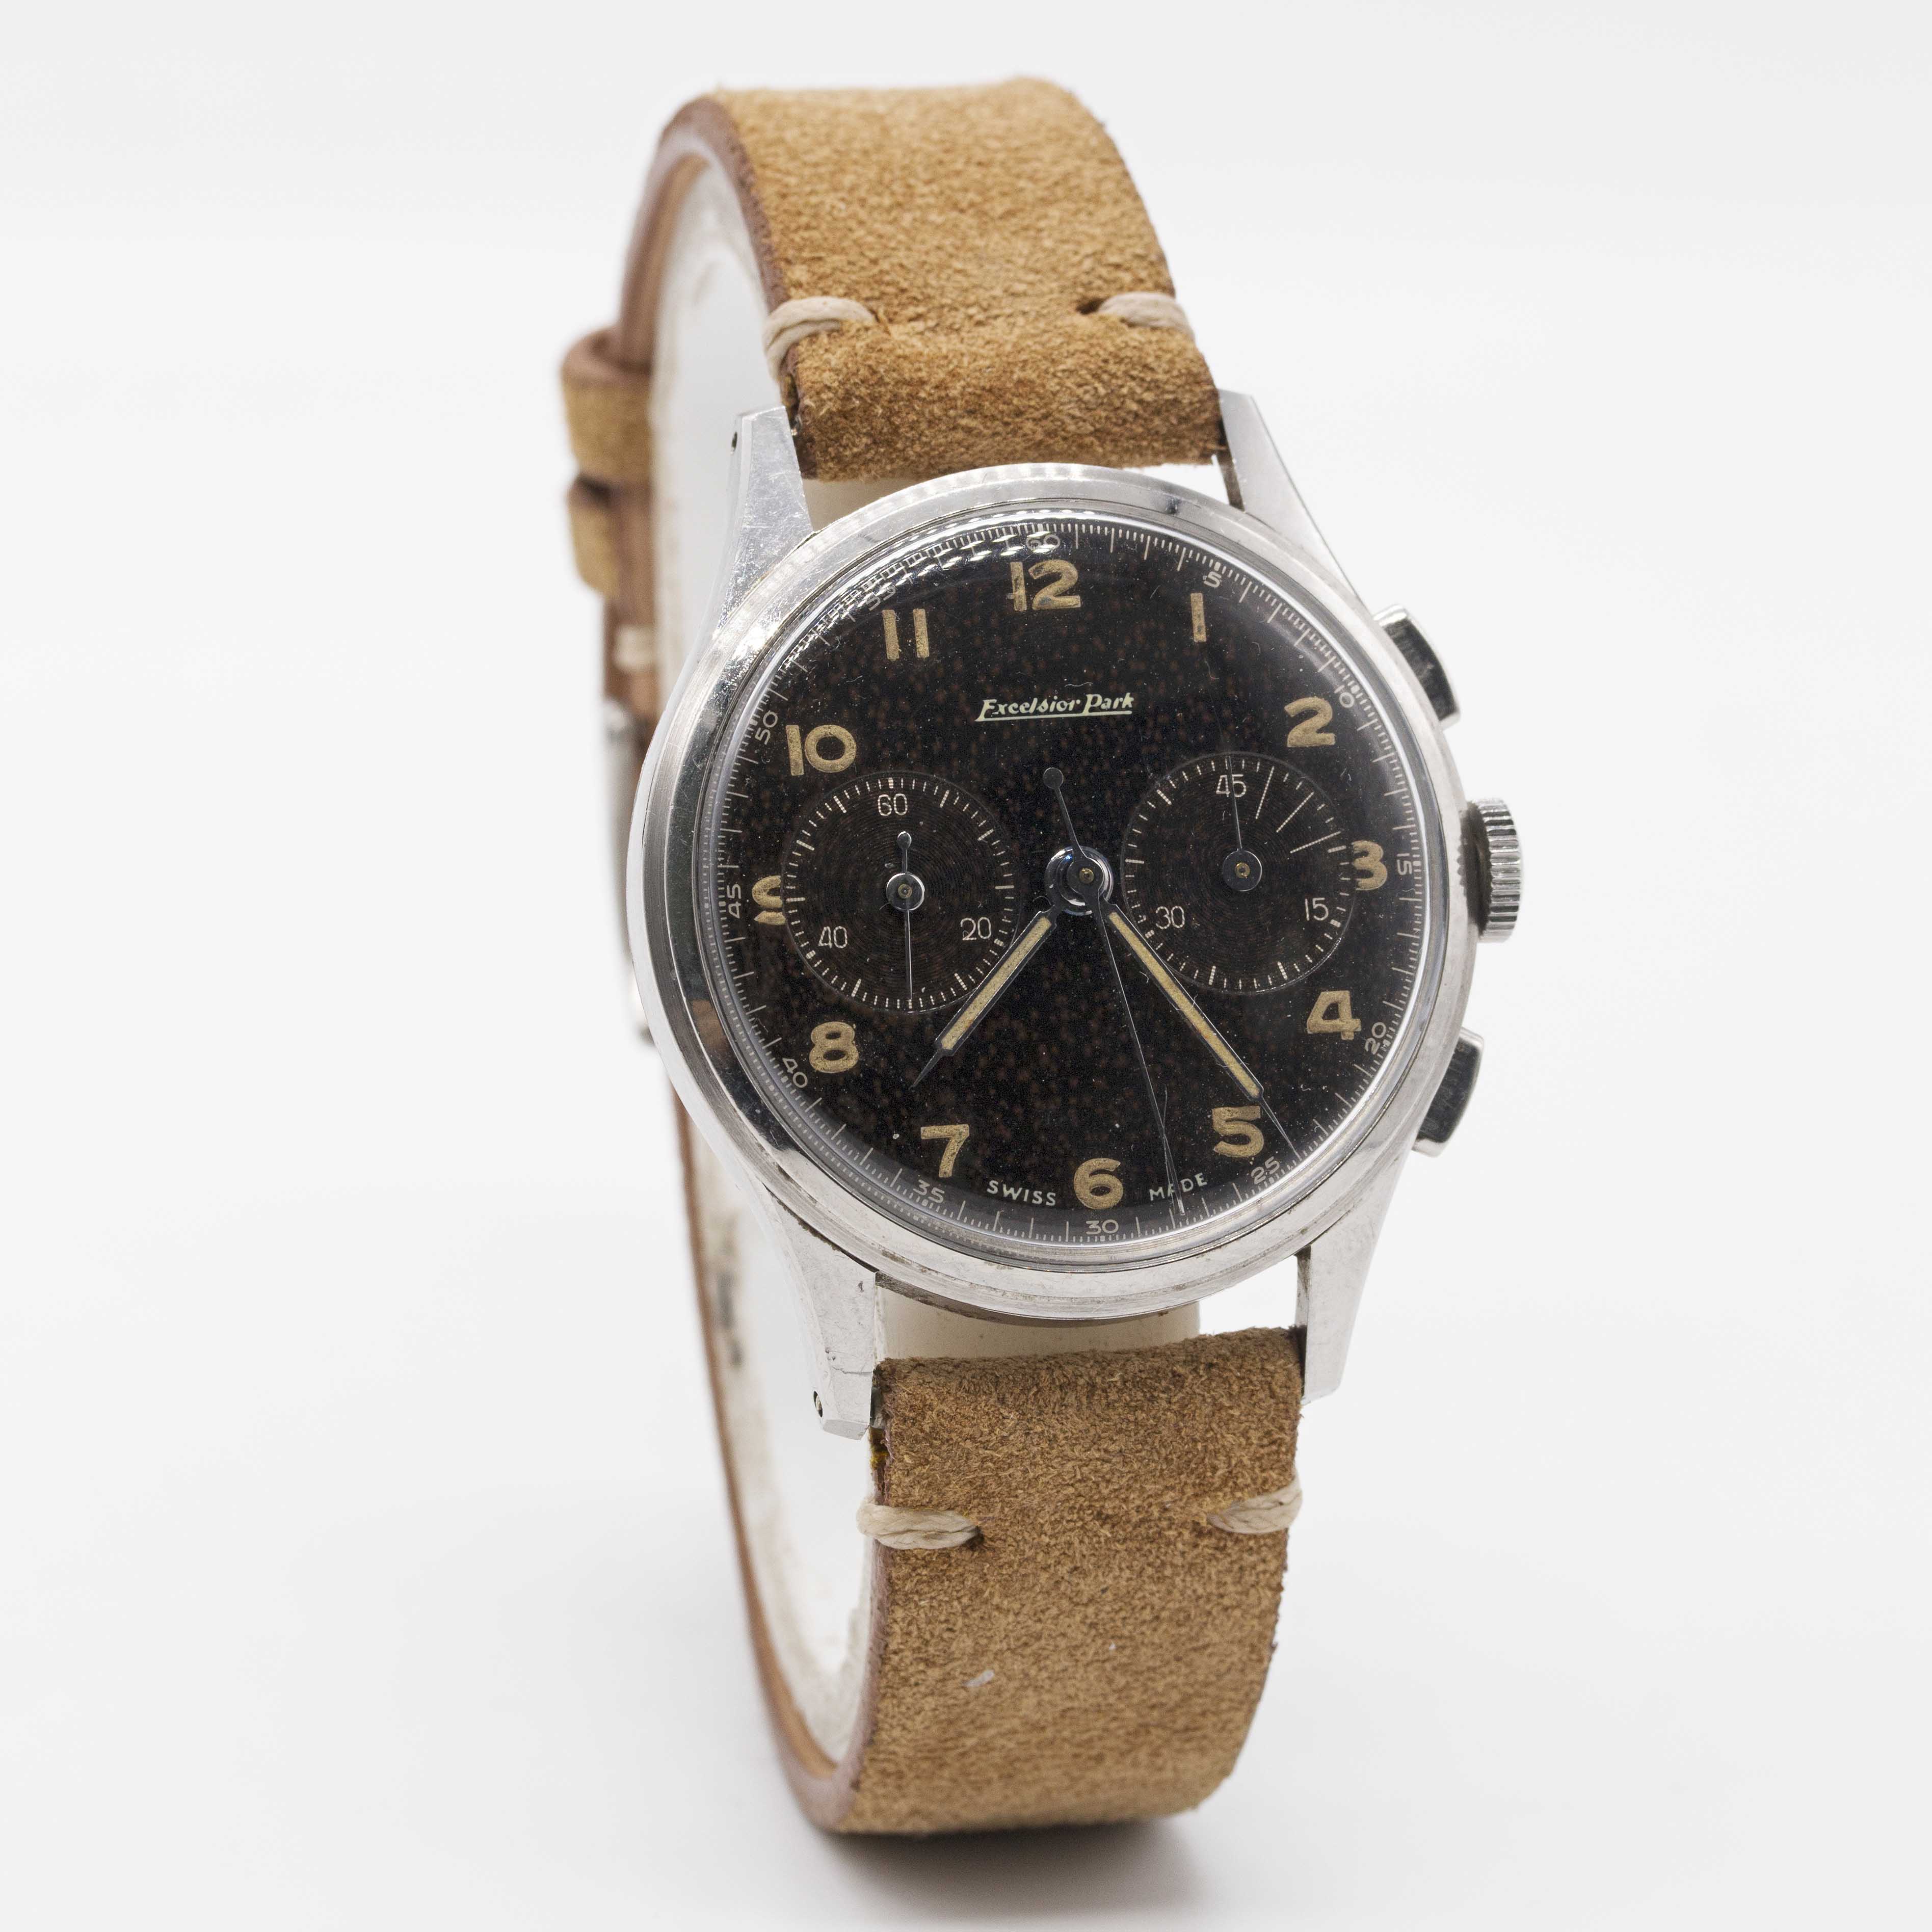 A GENTLEMAN'S STAINLESS STEEL EXCELSIOR PARK CHRONOGRAPH WRIST WATCH CIRCA 1950s, WITH GLOSS - Image 4 of 8